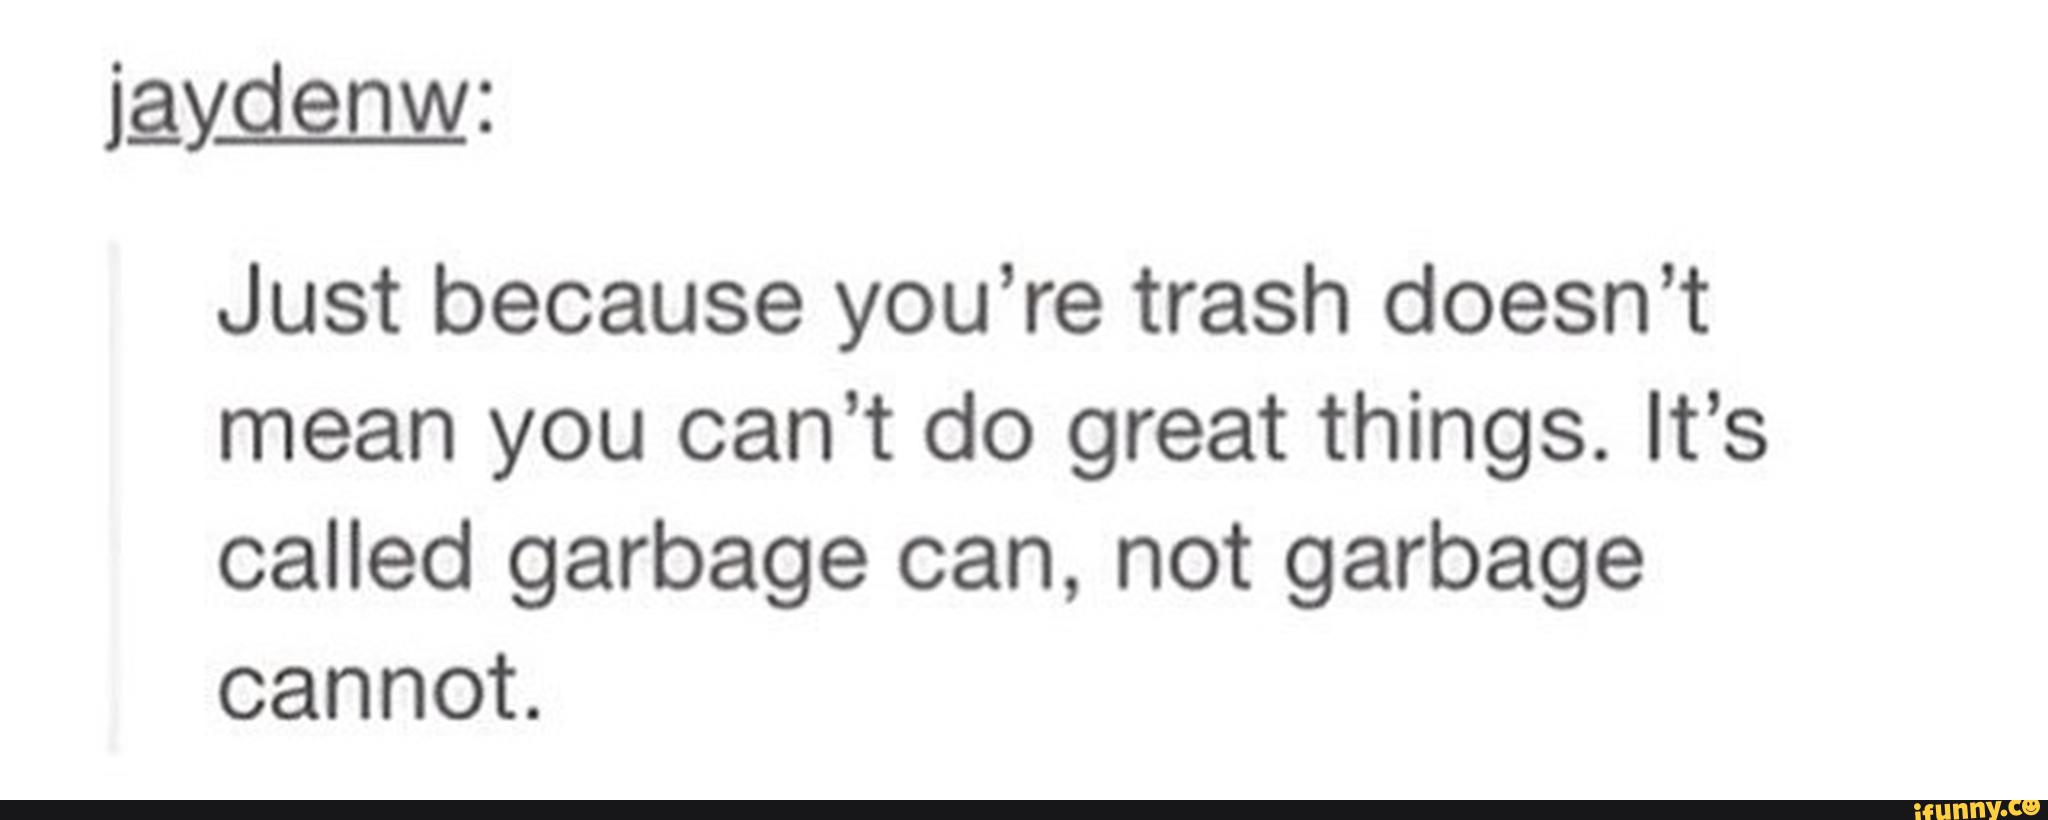 Just because you're trash doesn't mean you can’t do great things....